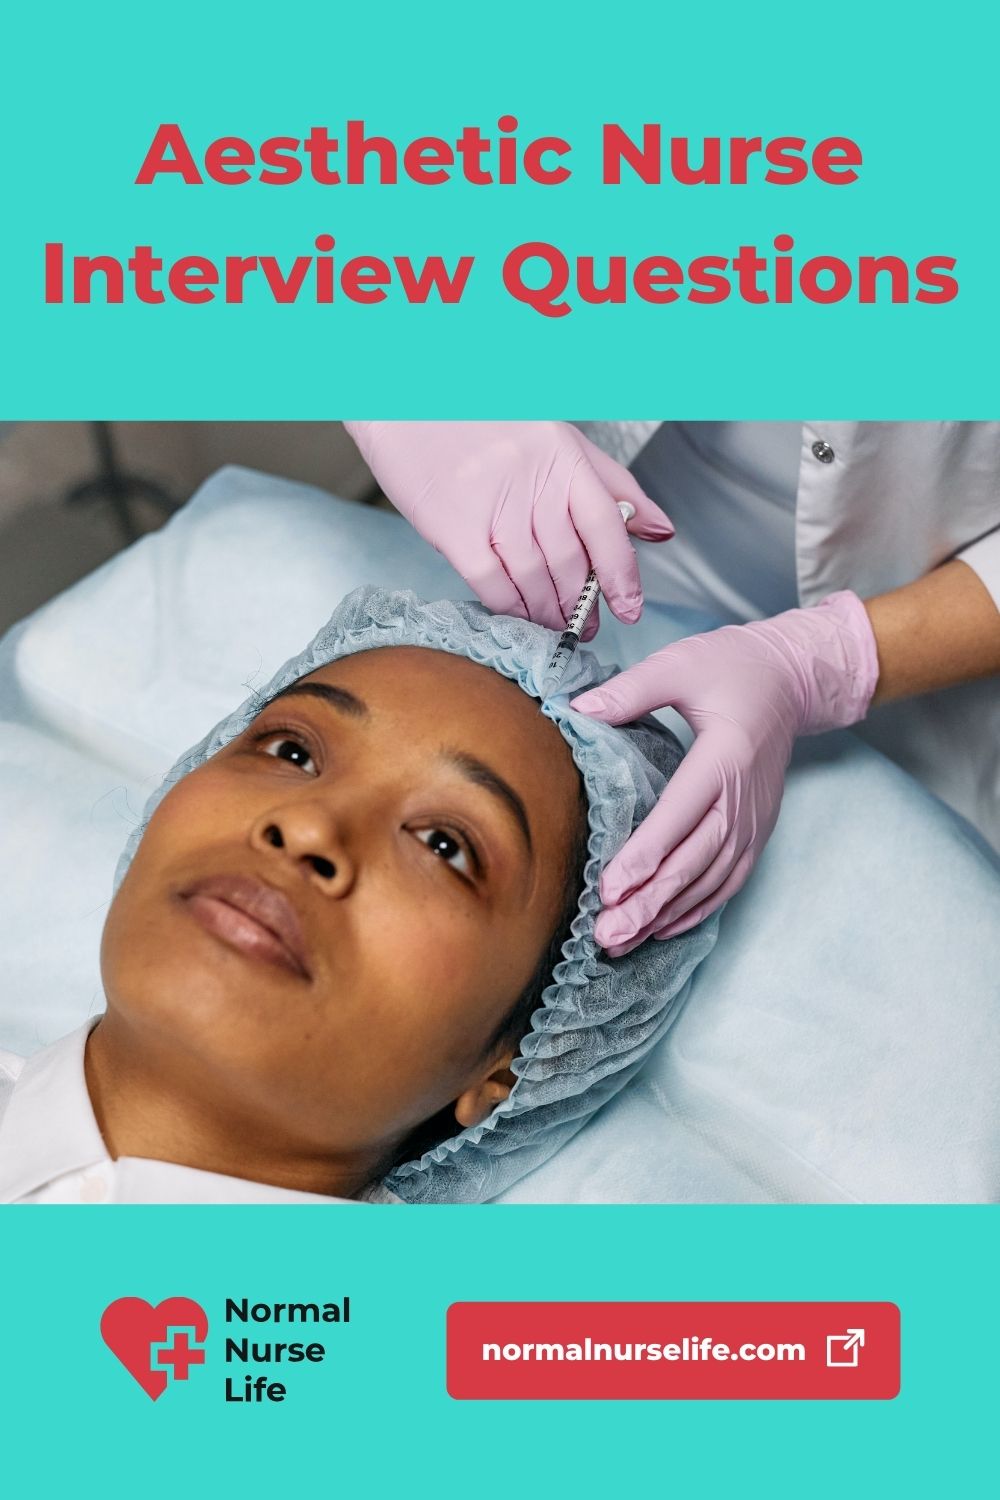 Aesthetic nurse interview questions and answers